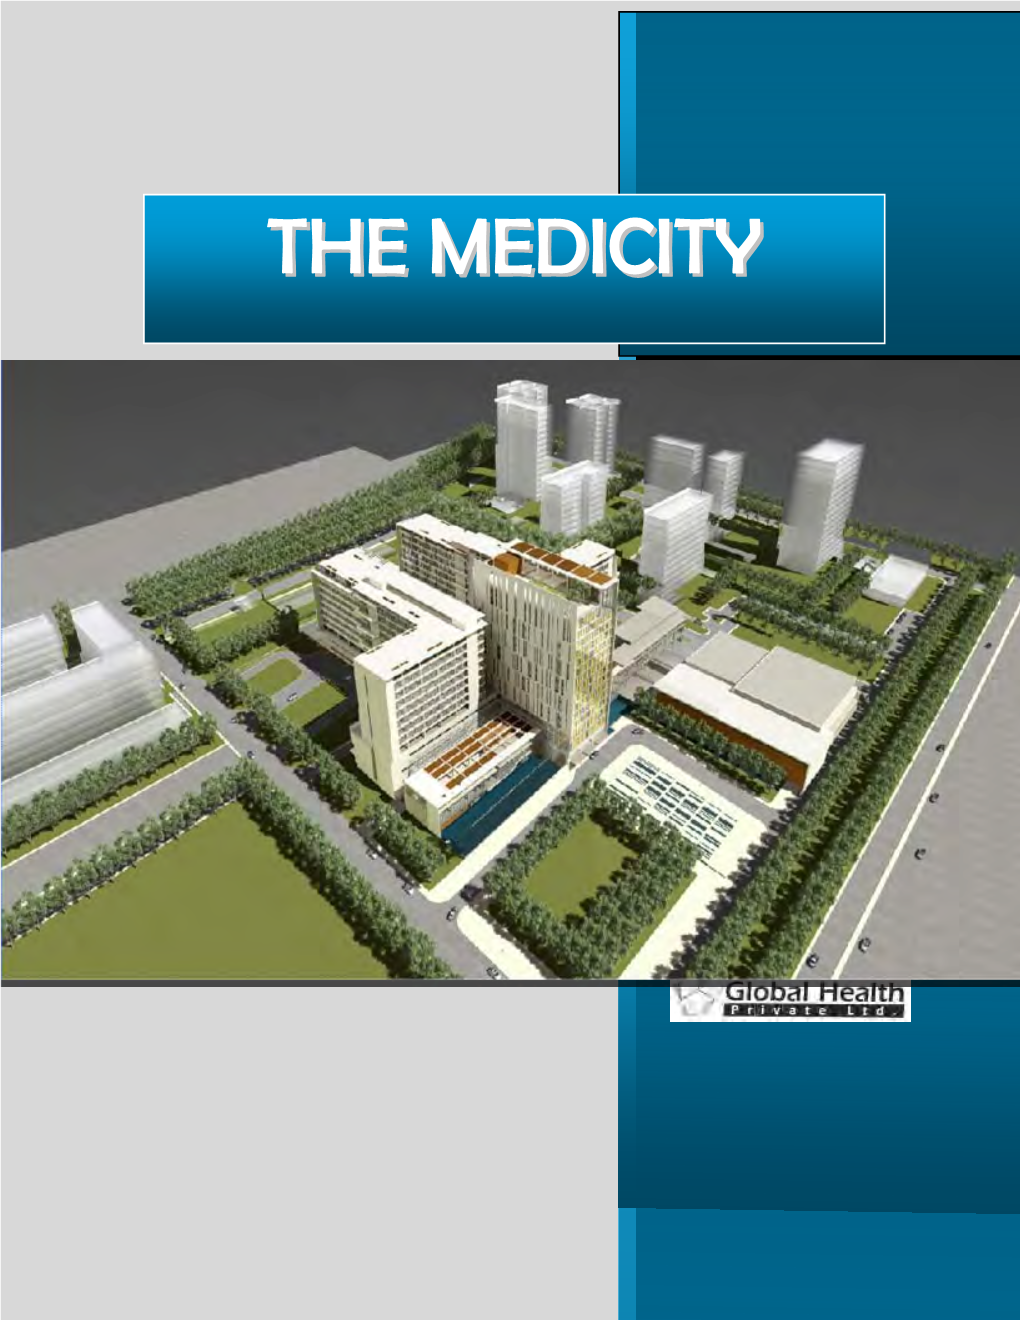 The Medicity: a New Concept in Medical and Health Care